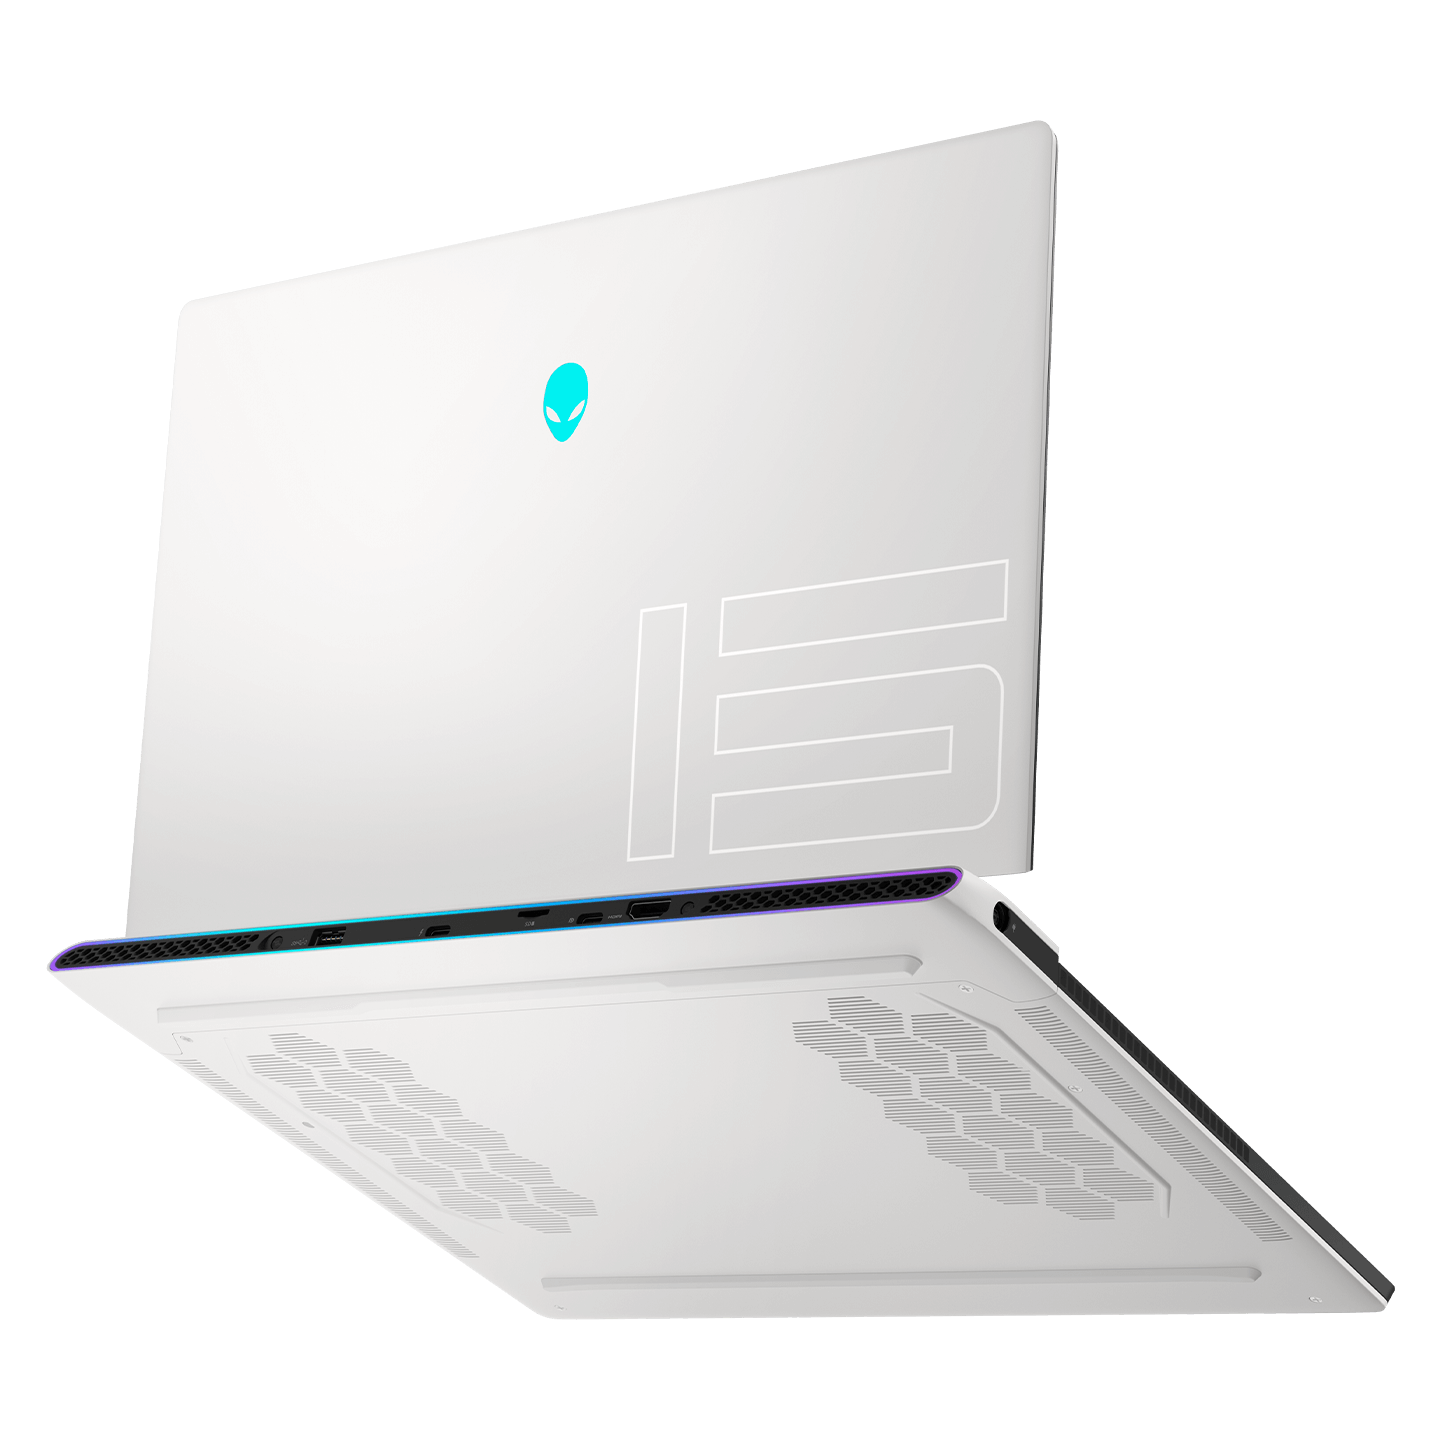 Alienware Gaming Laptops - Dell Laptops & Notebooks | Dell USA